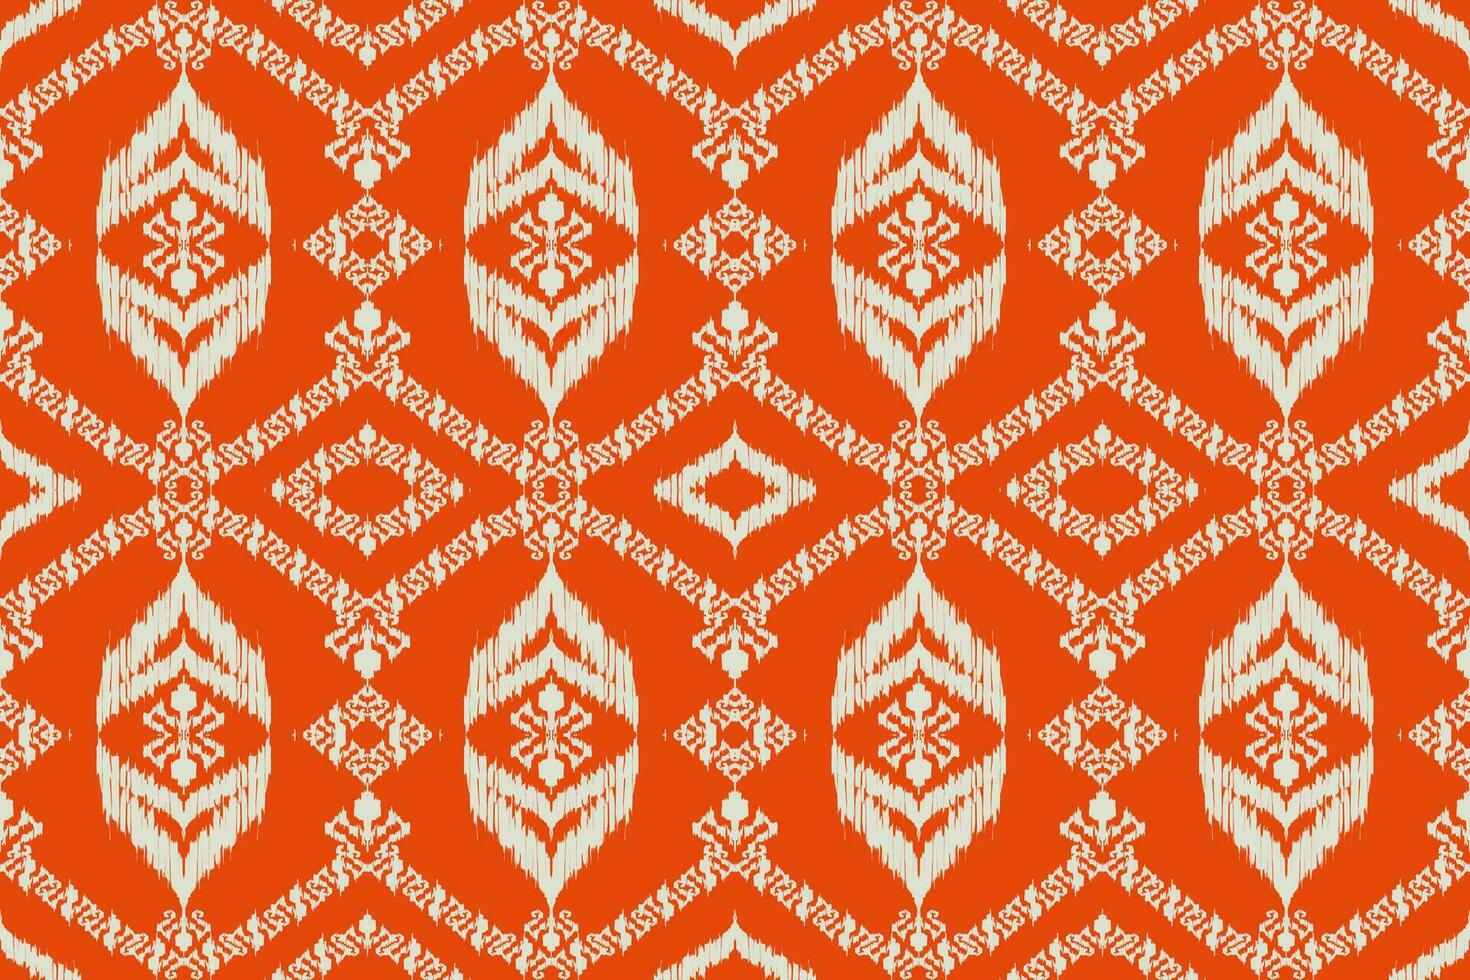 Ikat paisley embroidery on the fabric in Indonesia,India and asian countries.geometric ethnic oriental seamless pattern.Aztec style. illustration.design for texture,fabric,clothing,wrapping,carpet. vector